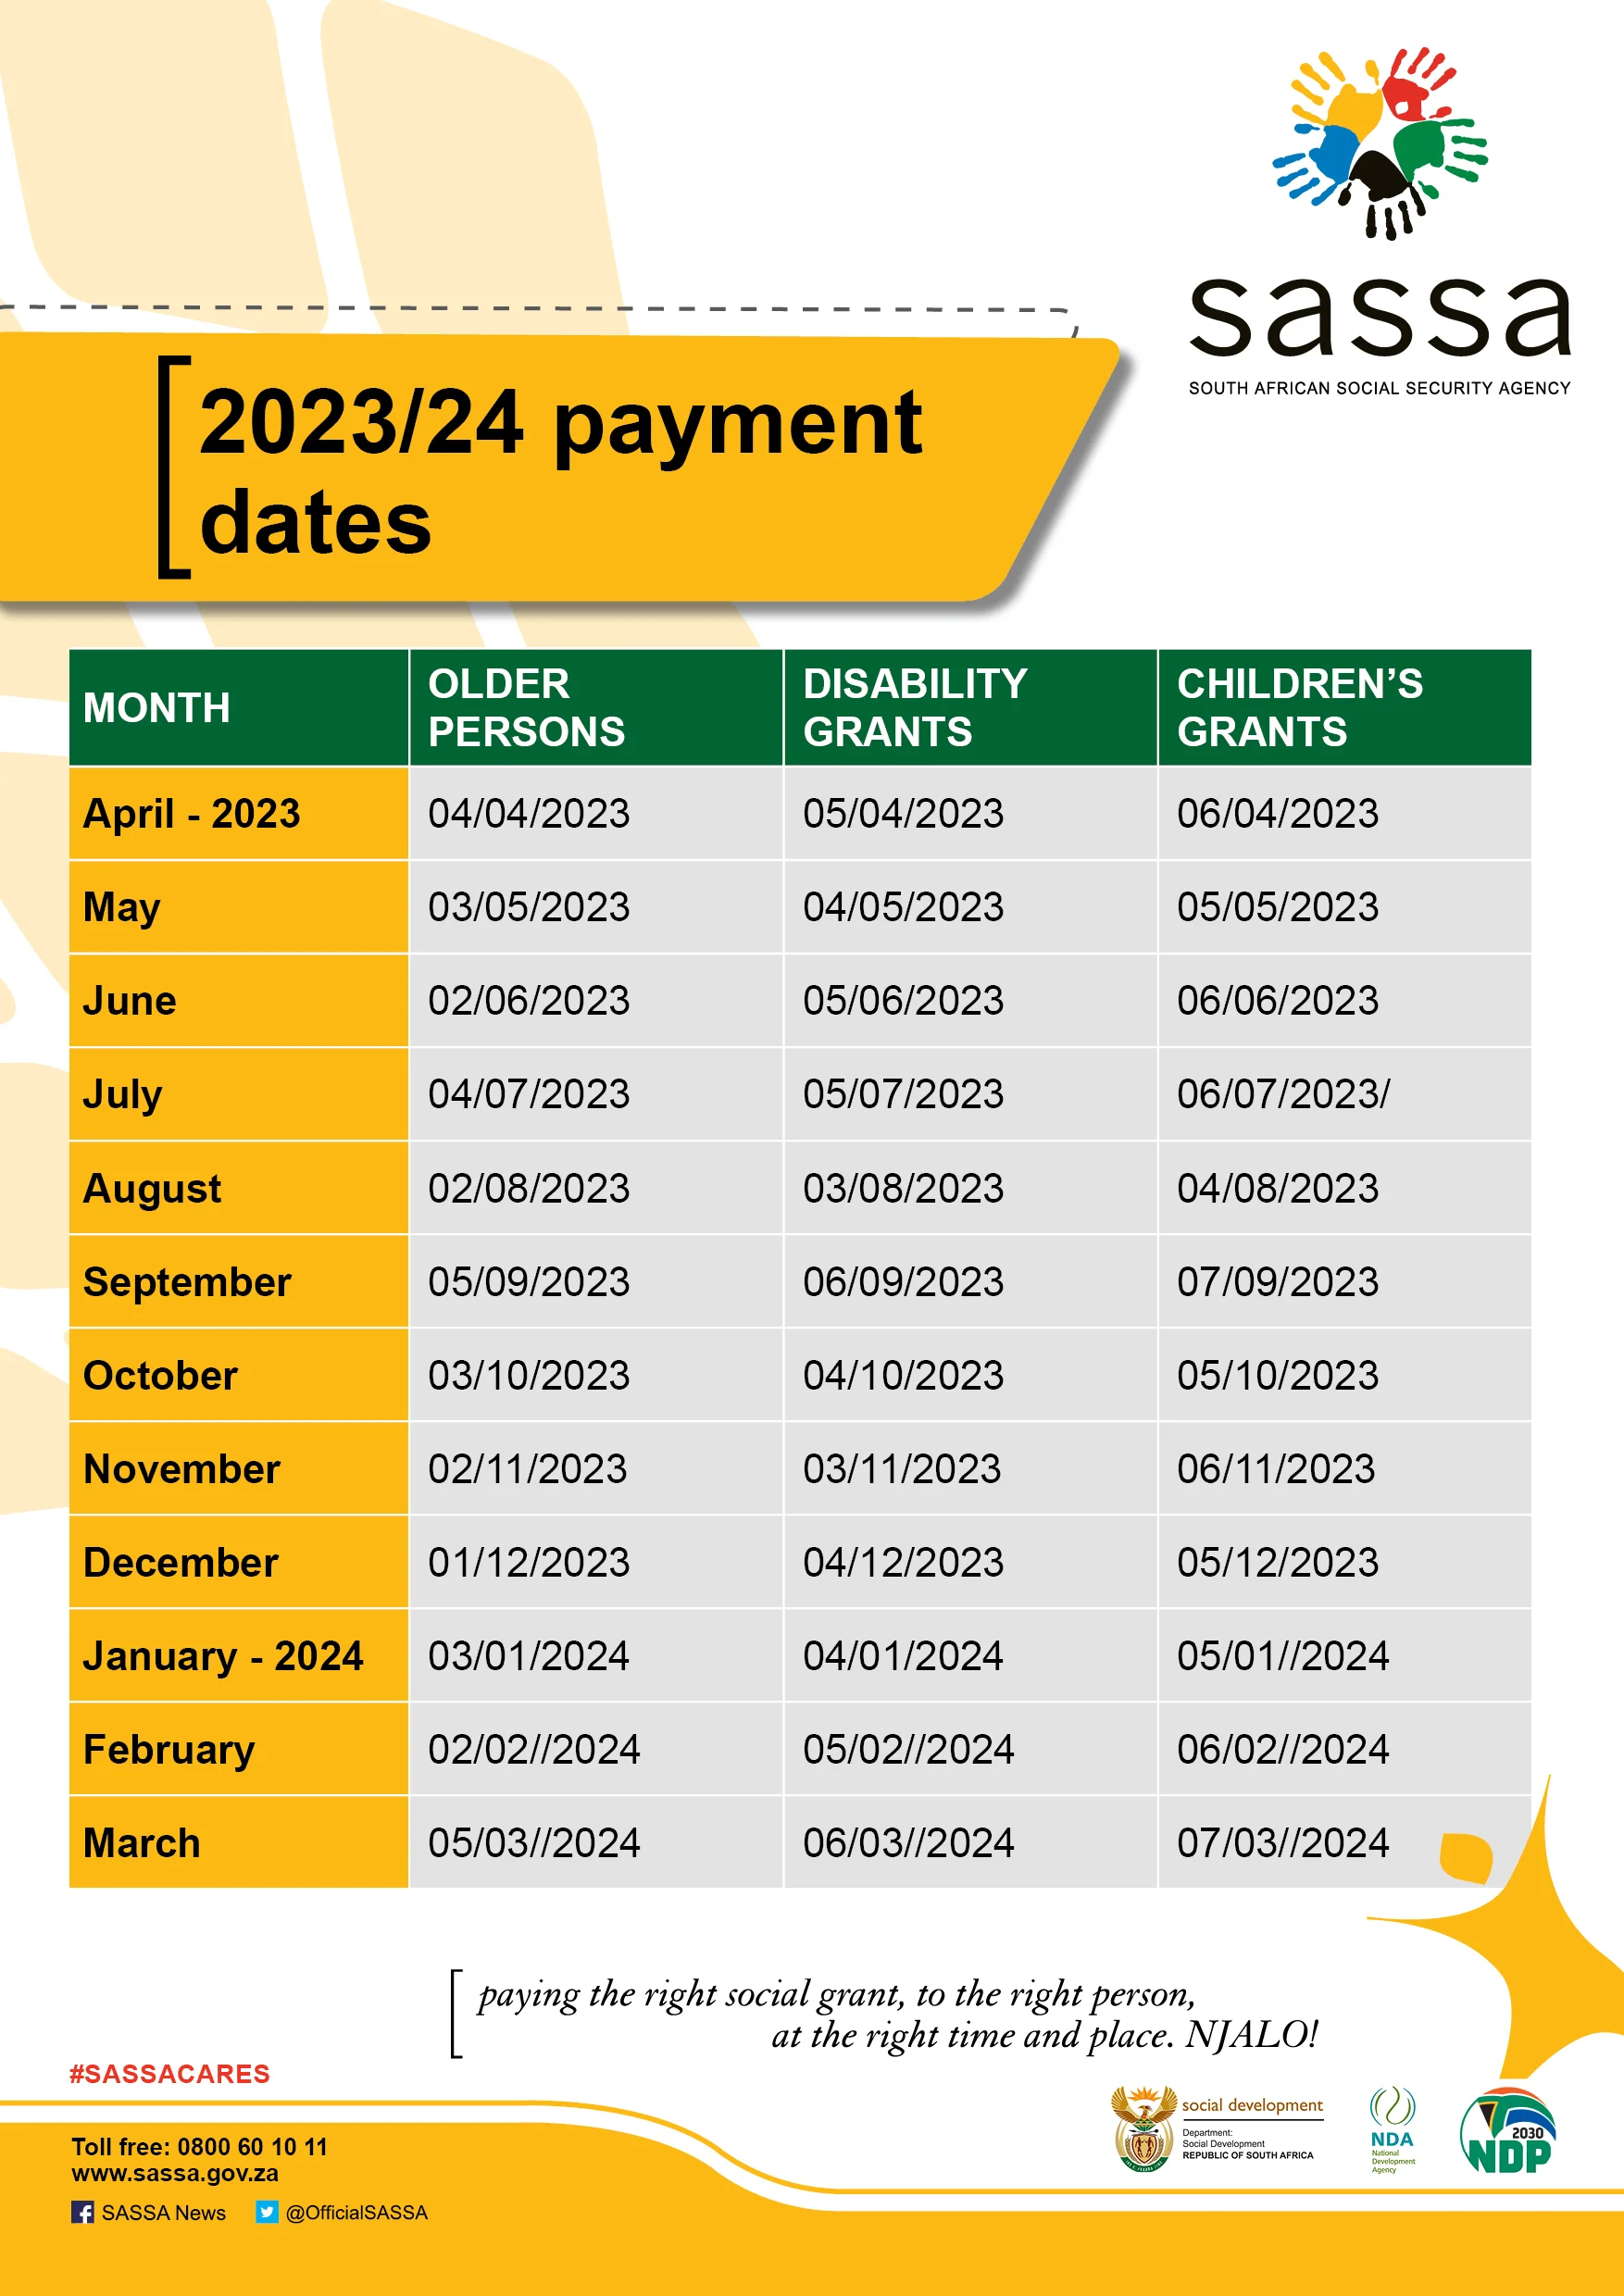 Changes to the SASSA Payment Schedule for 2023/2024